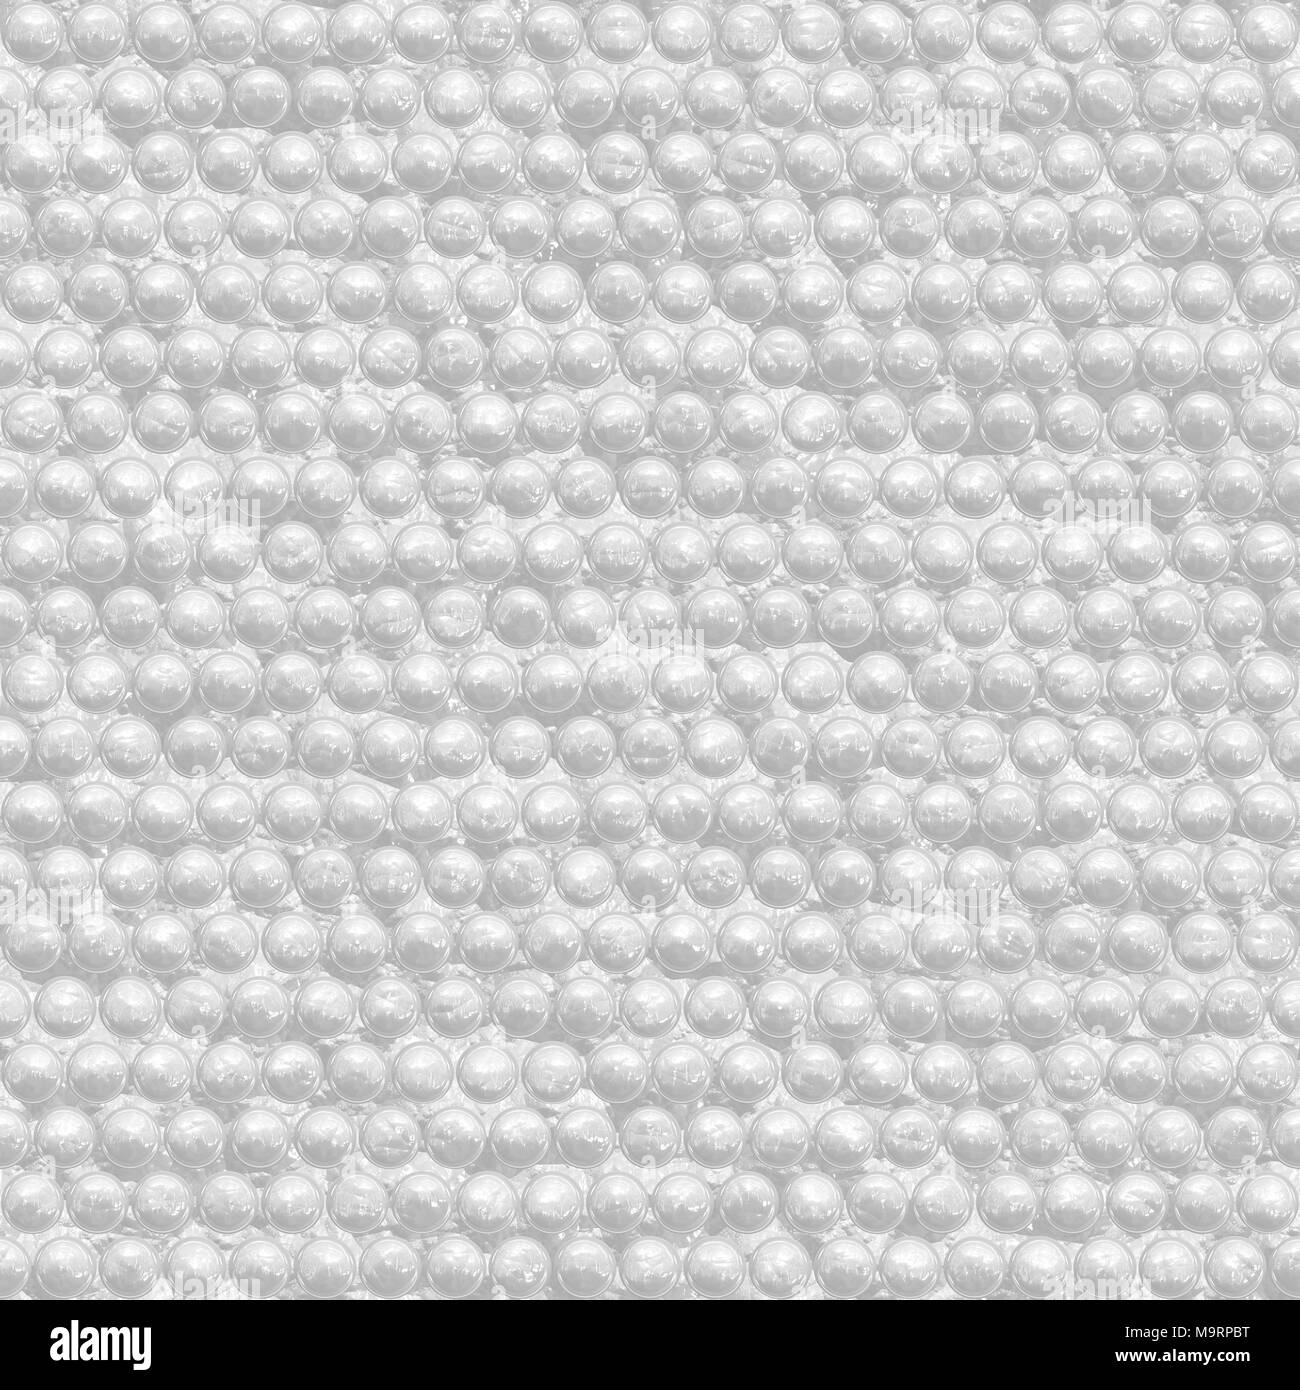 Wrapping paper, bubble wrap texture. Protection for objects in shipments  Stock Photo - Alamy